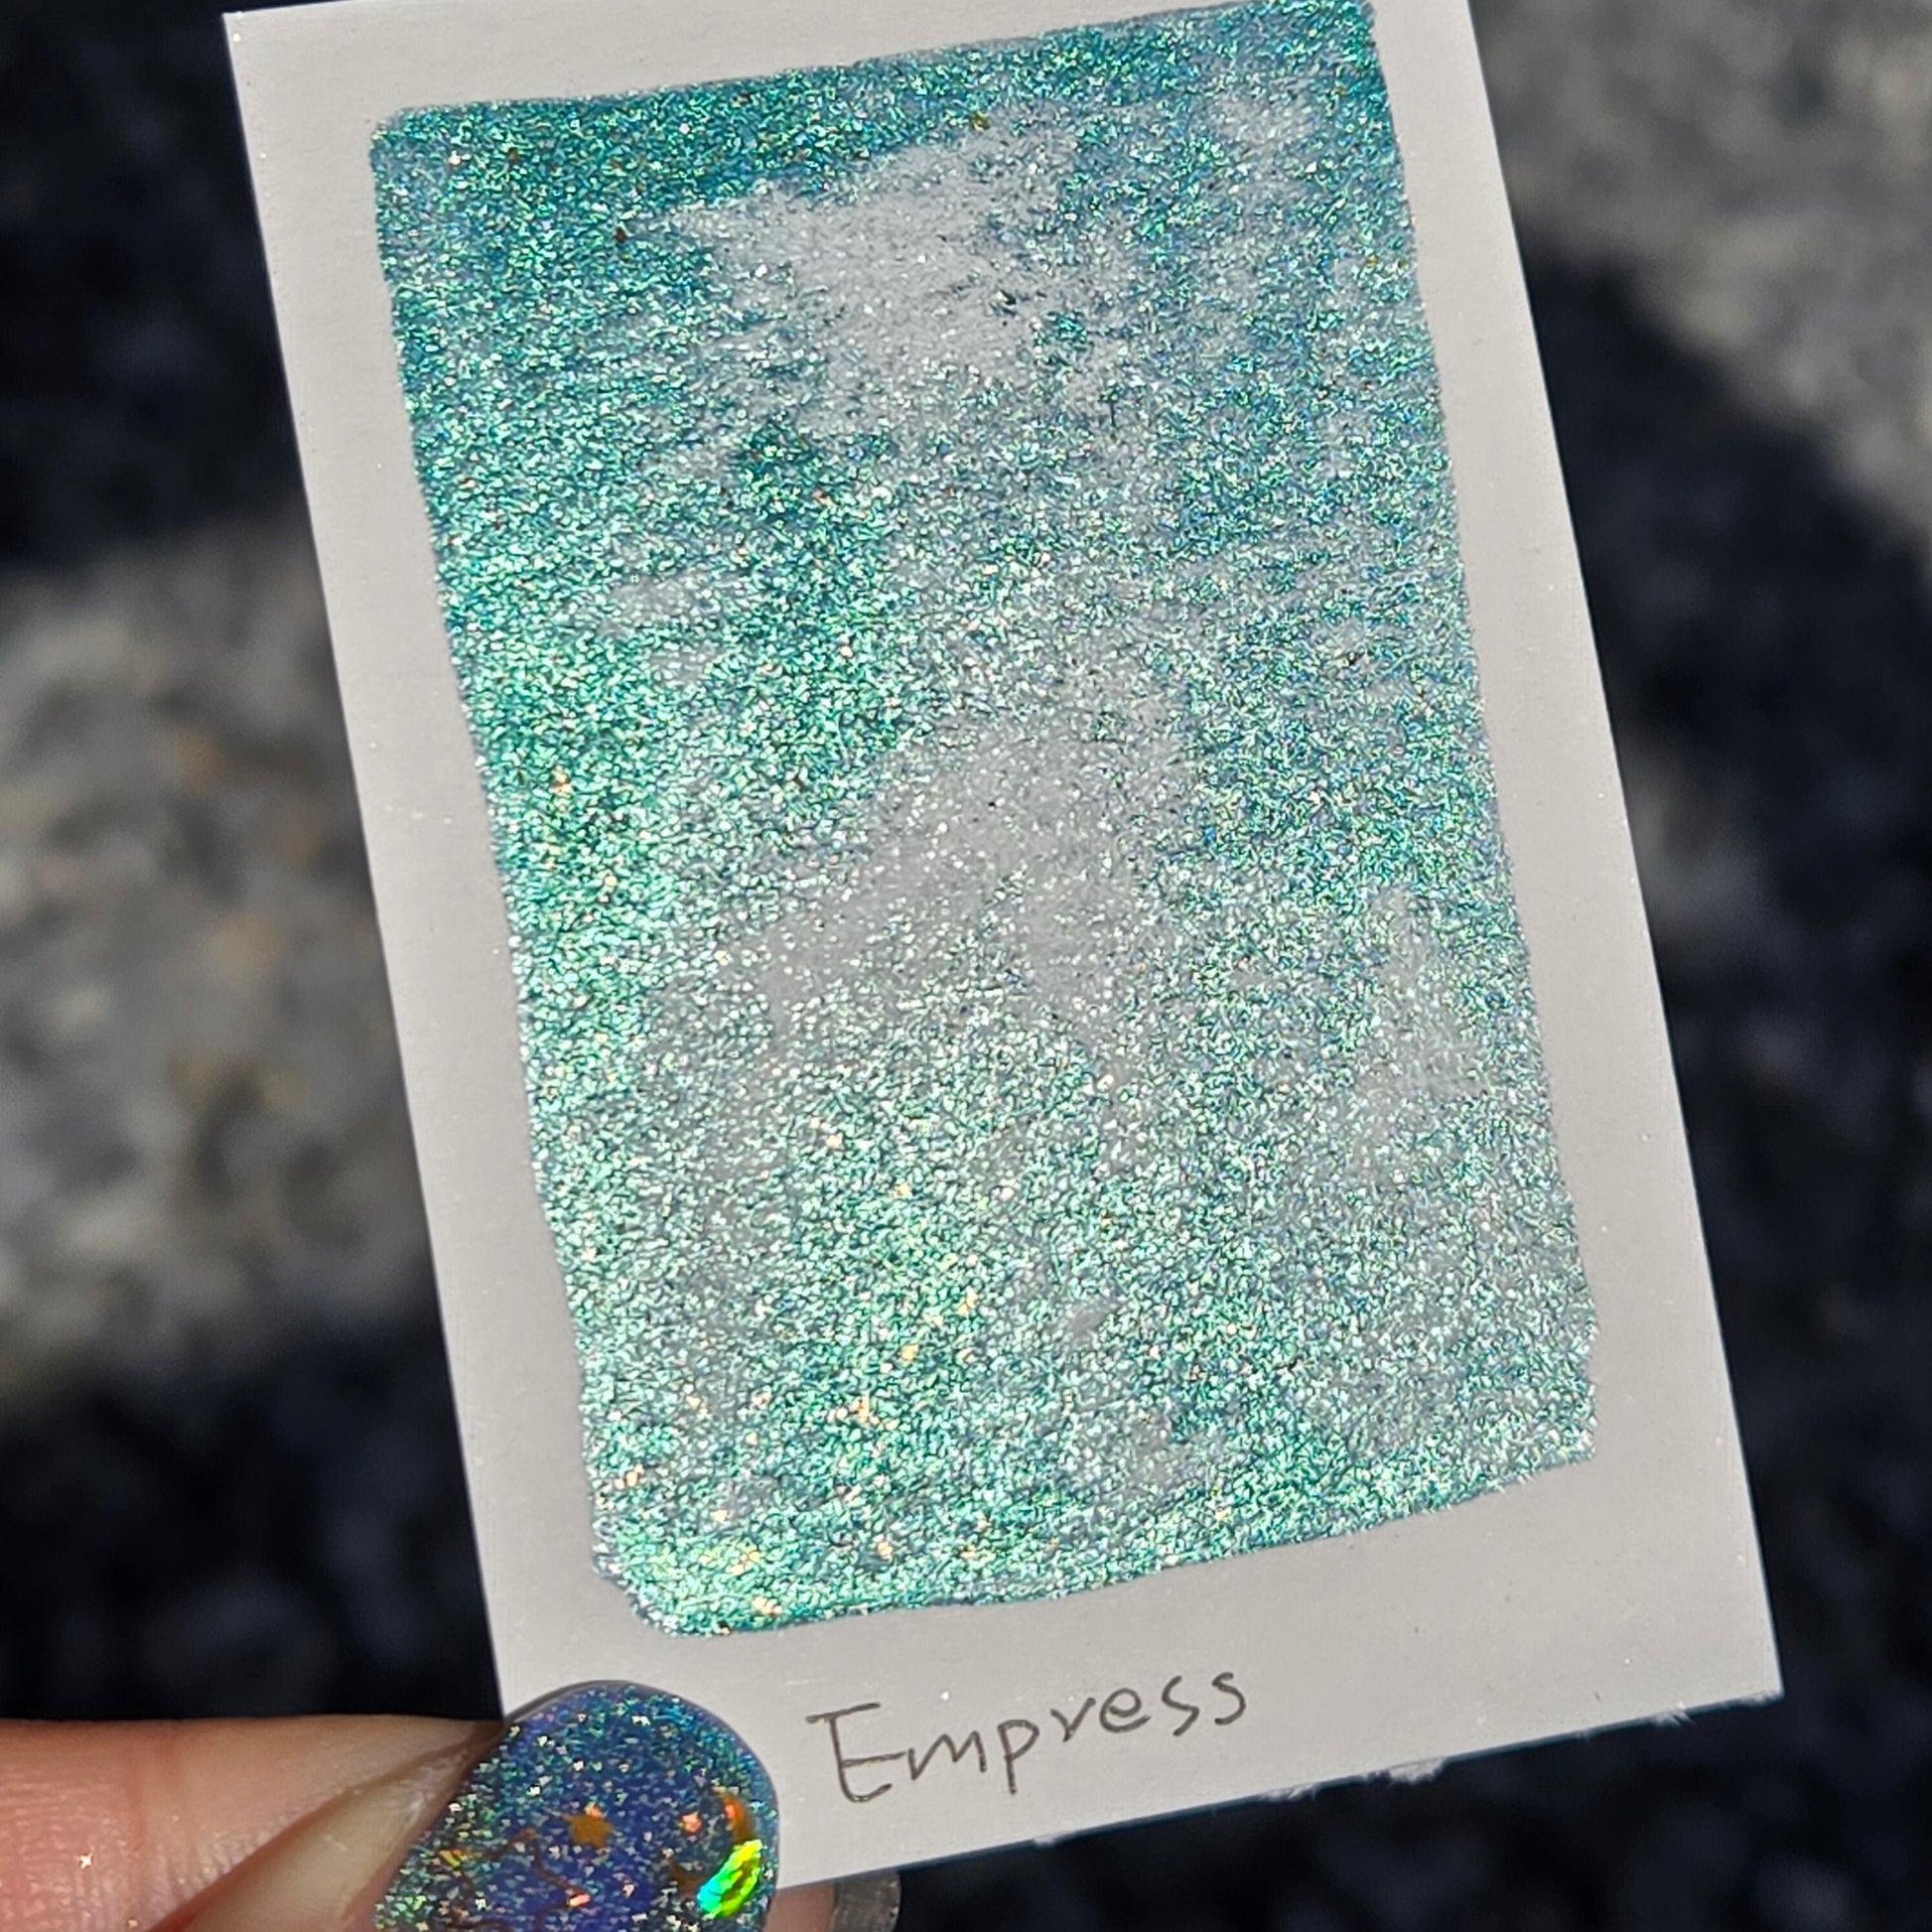 Empress Green Teal Half Pan Handmade Shimmer Watercolor Paints by iuilewatercolors